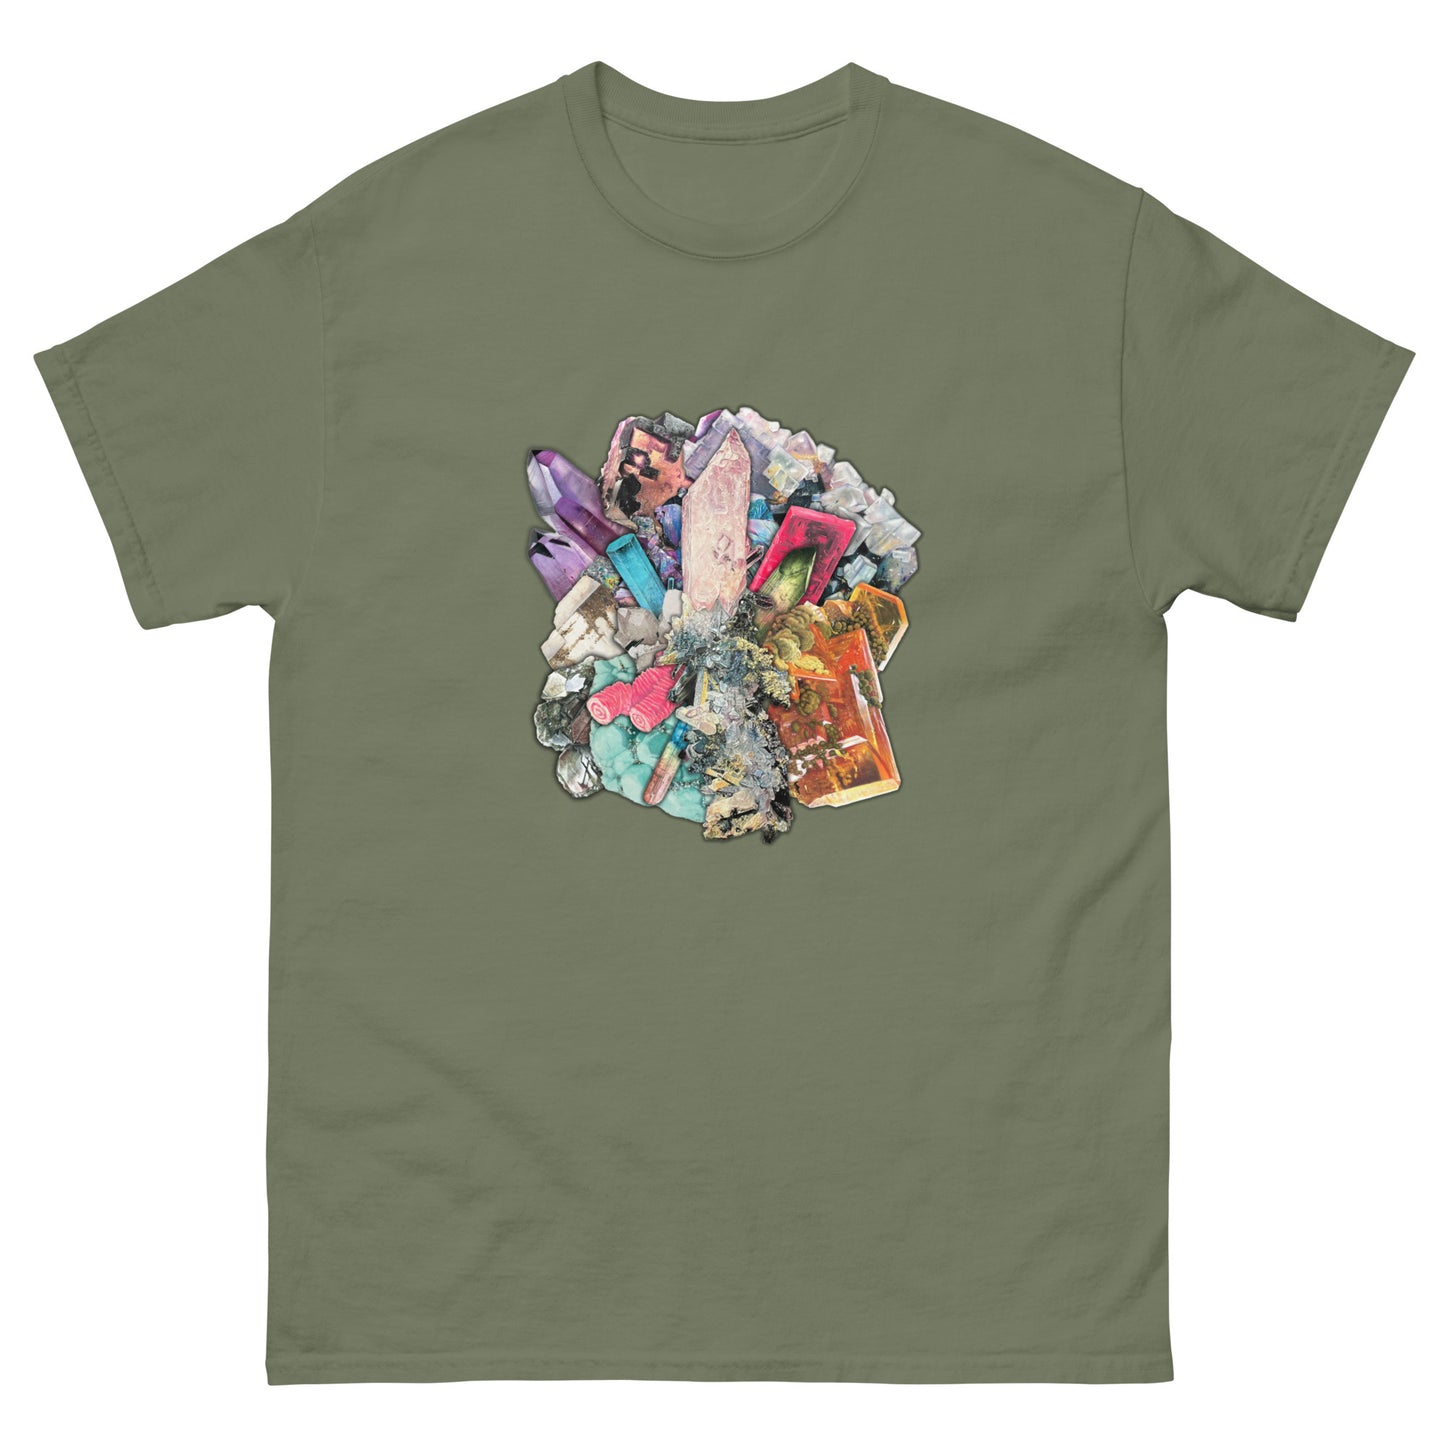 Mineral Art Collage Adult T-Shirt